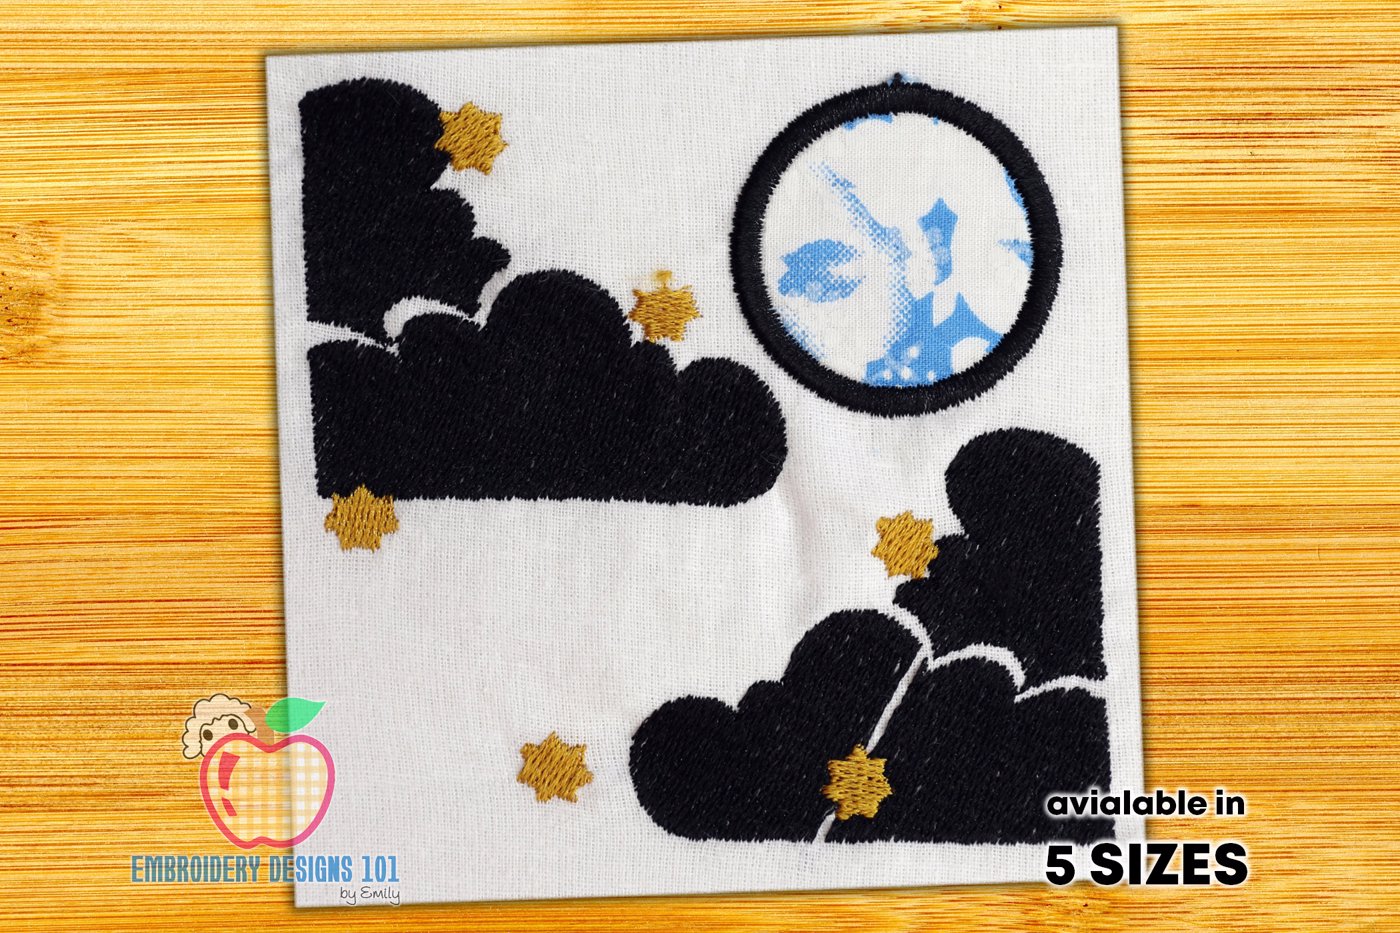 Full moon with cloud dark night Scene embroidery applique